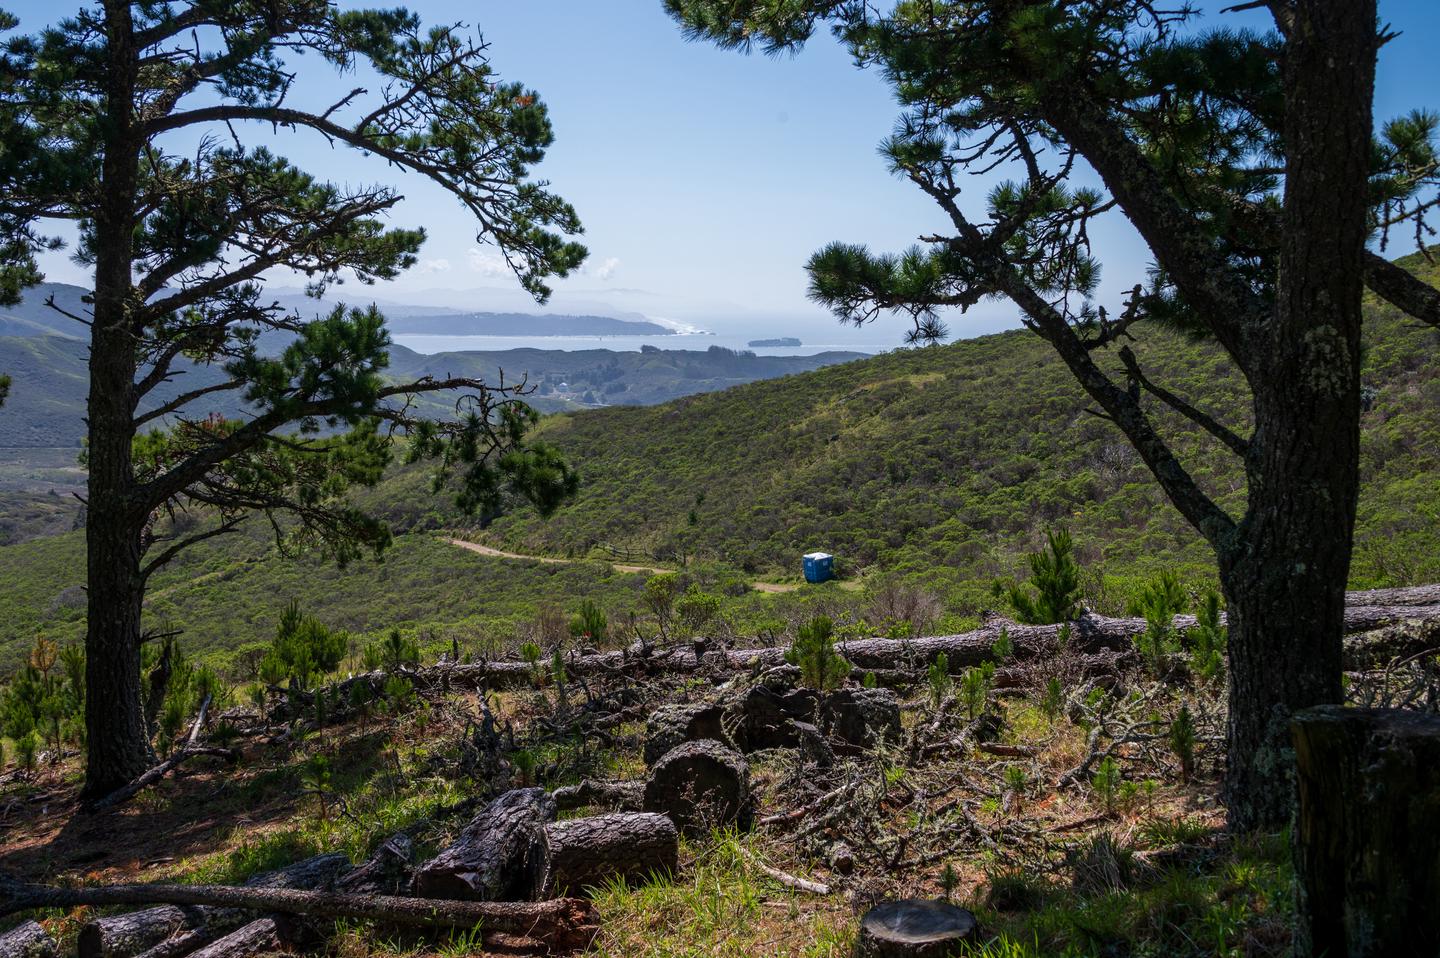 View from Site 1 at Hawk Camp on a clear day. You can see the trail leading the to campground, and the port-o-pottie alongside it. In the distance you can the straight of the Golden Gate, the ocean, and the city of San Francisco.View from Site 1 at Hawk Campground